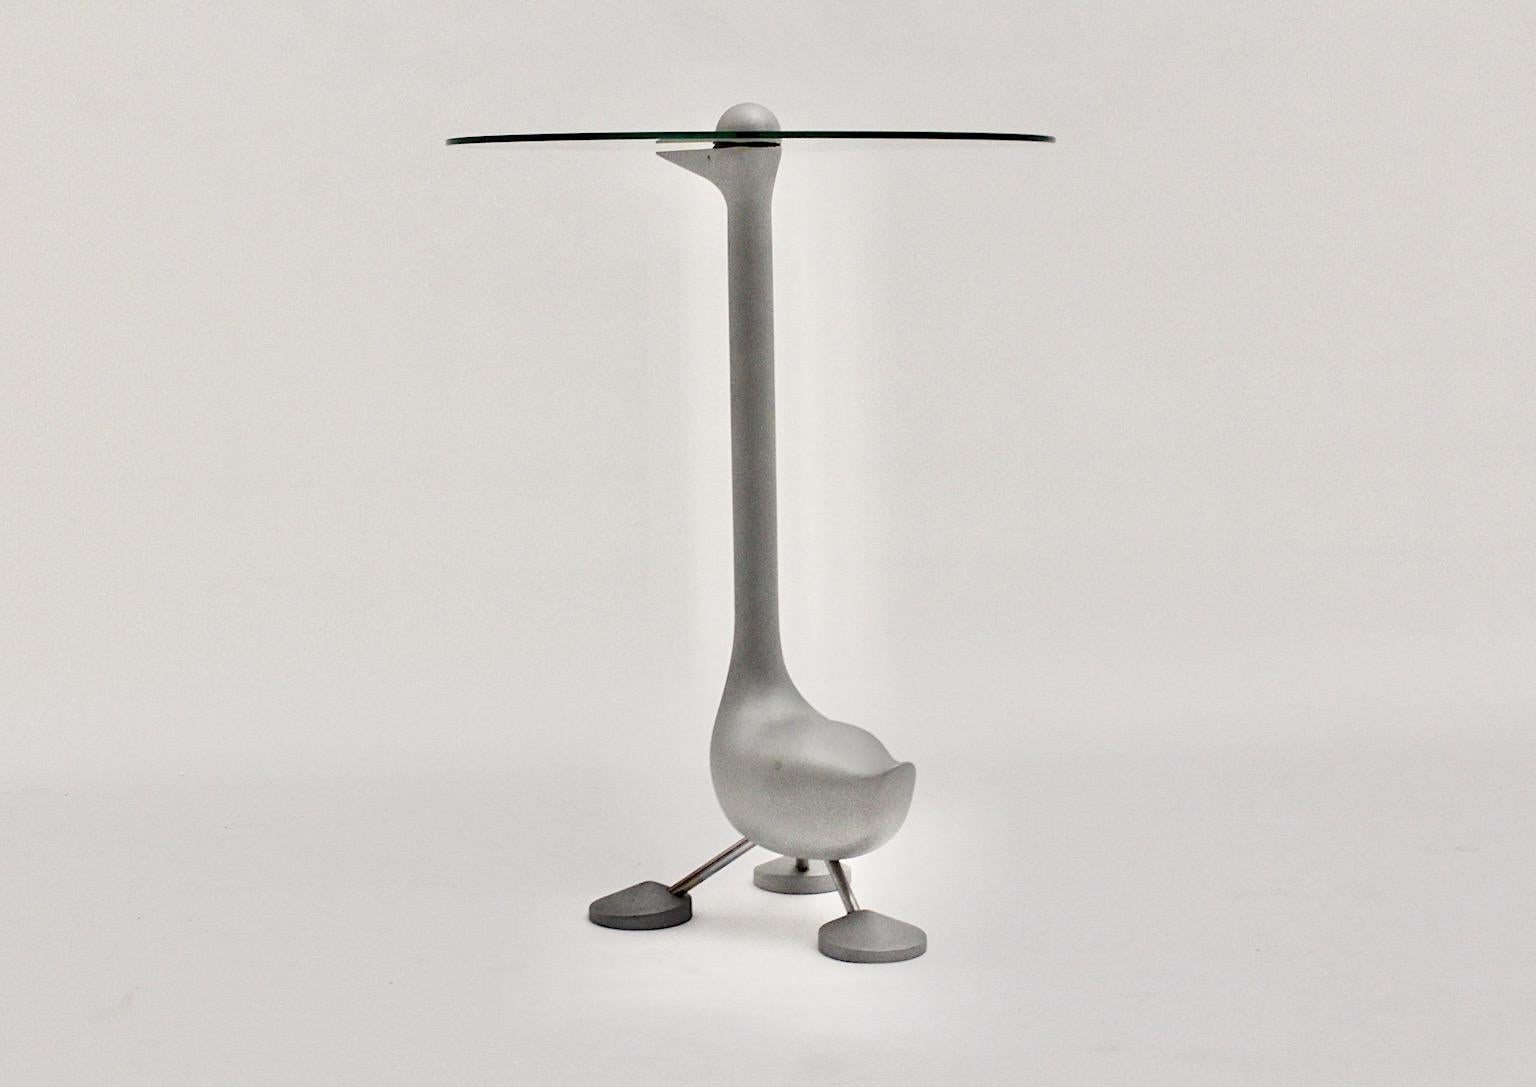 Post-Modern vintage side table sirfo goose table from cast aluminum in silver color with yellow beak by Alessando Mendini for Zanotta edizione 1986, Italy.
A stunning side table in whimsical goose shape in silver color with yellow beak and a clear